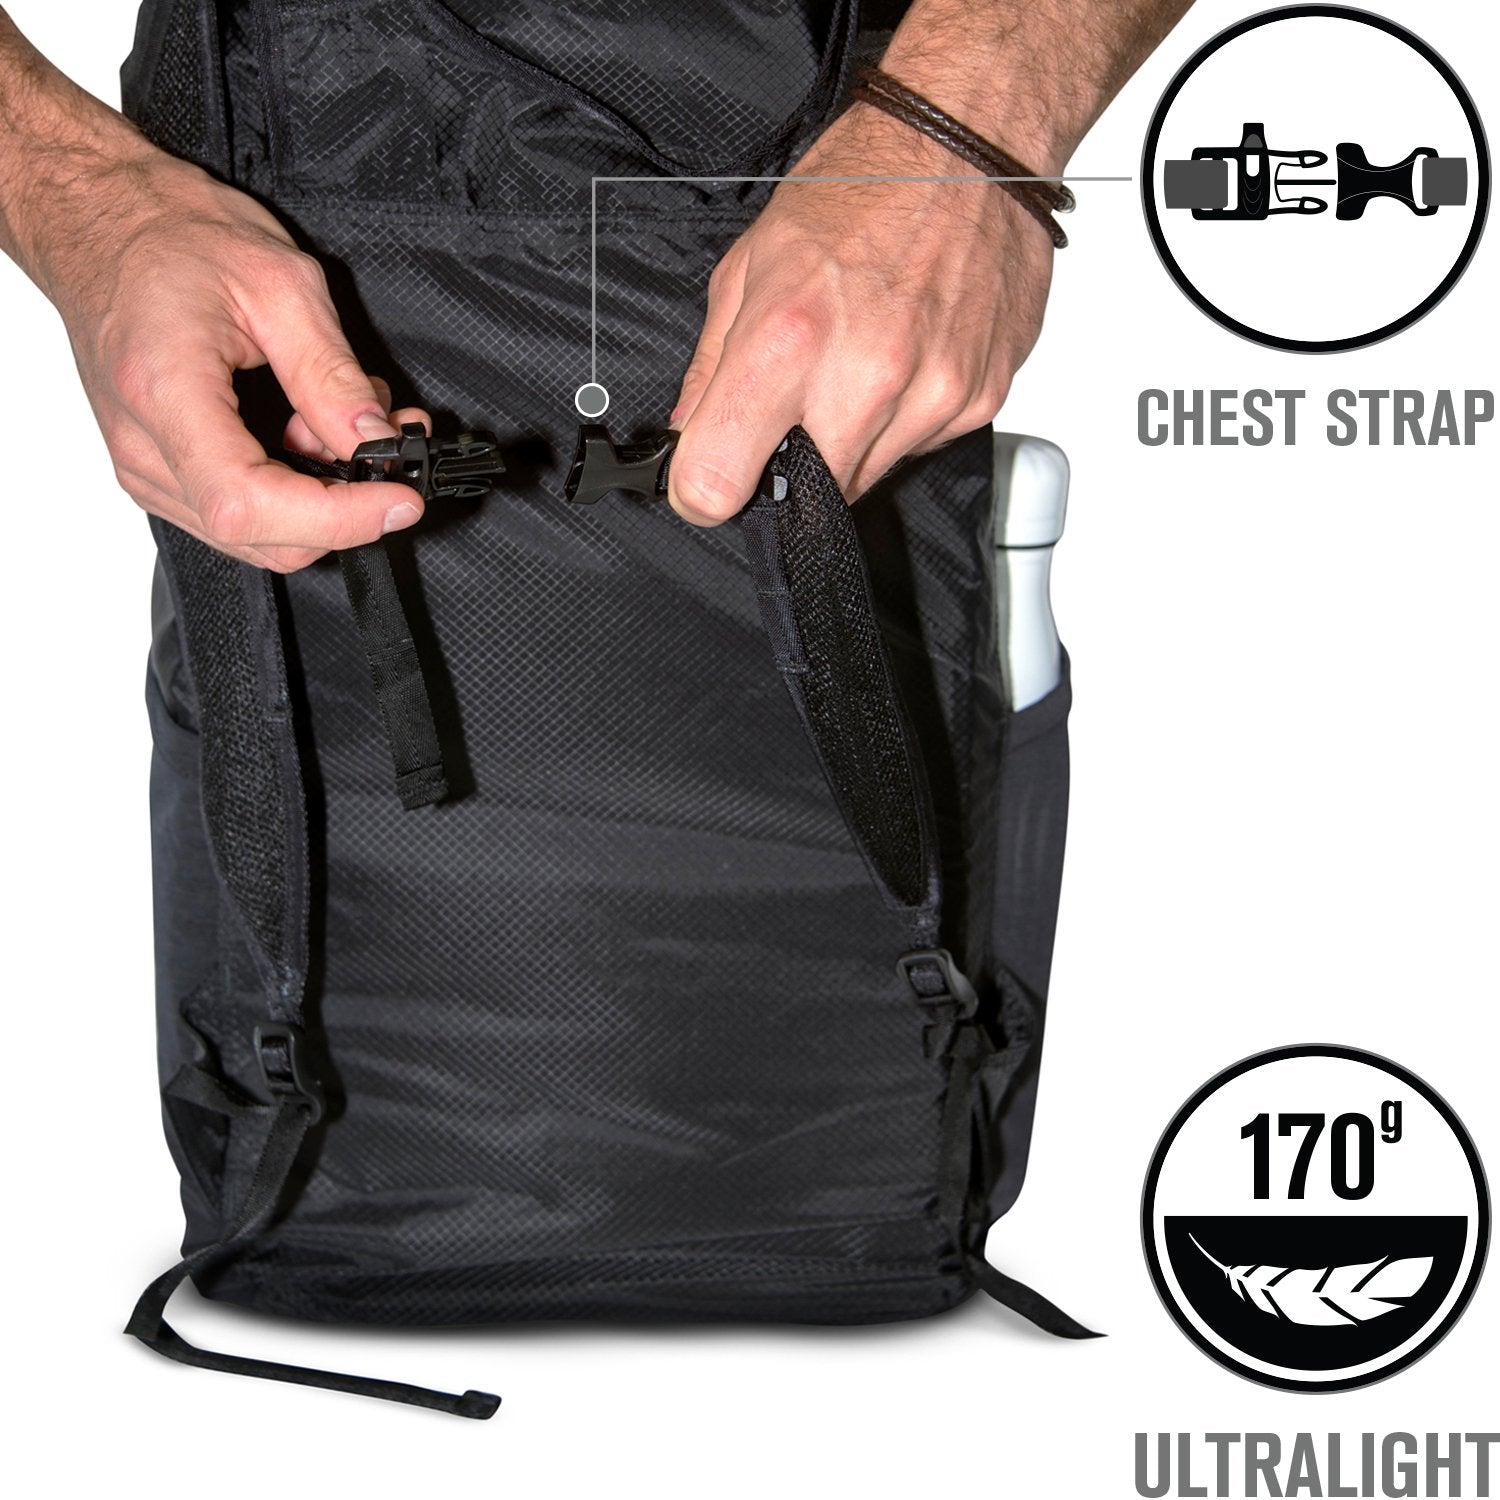 catalyst waterproof 20l backpack back view showing the chest strap text reads chest strap 170g ultralight